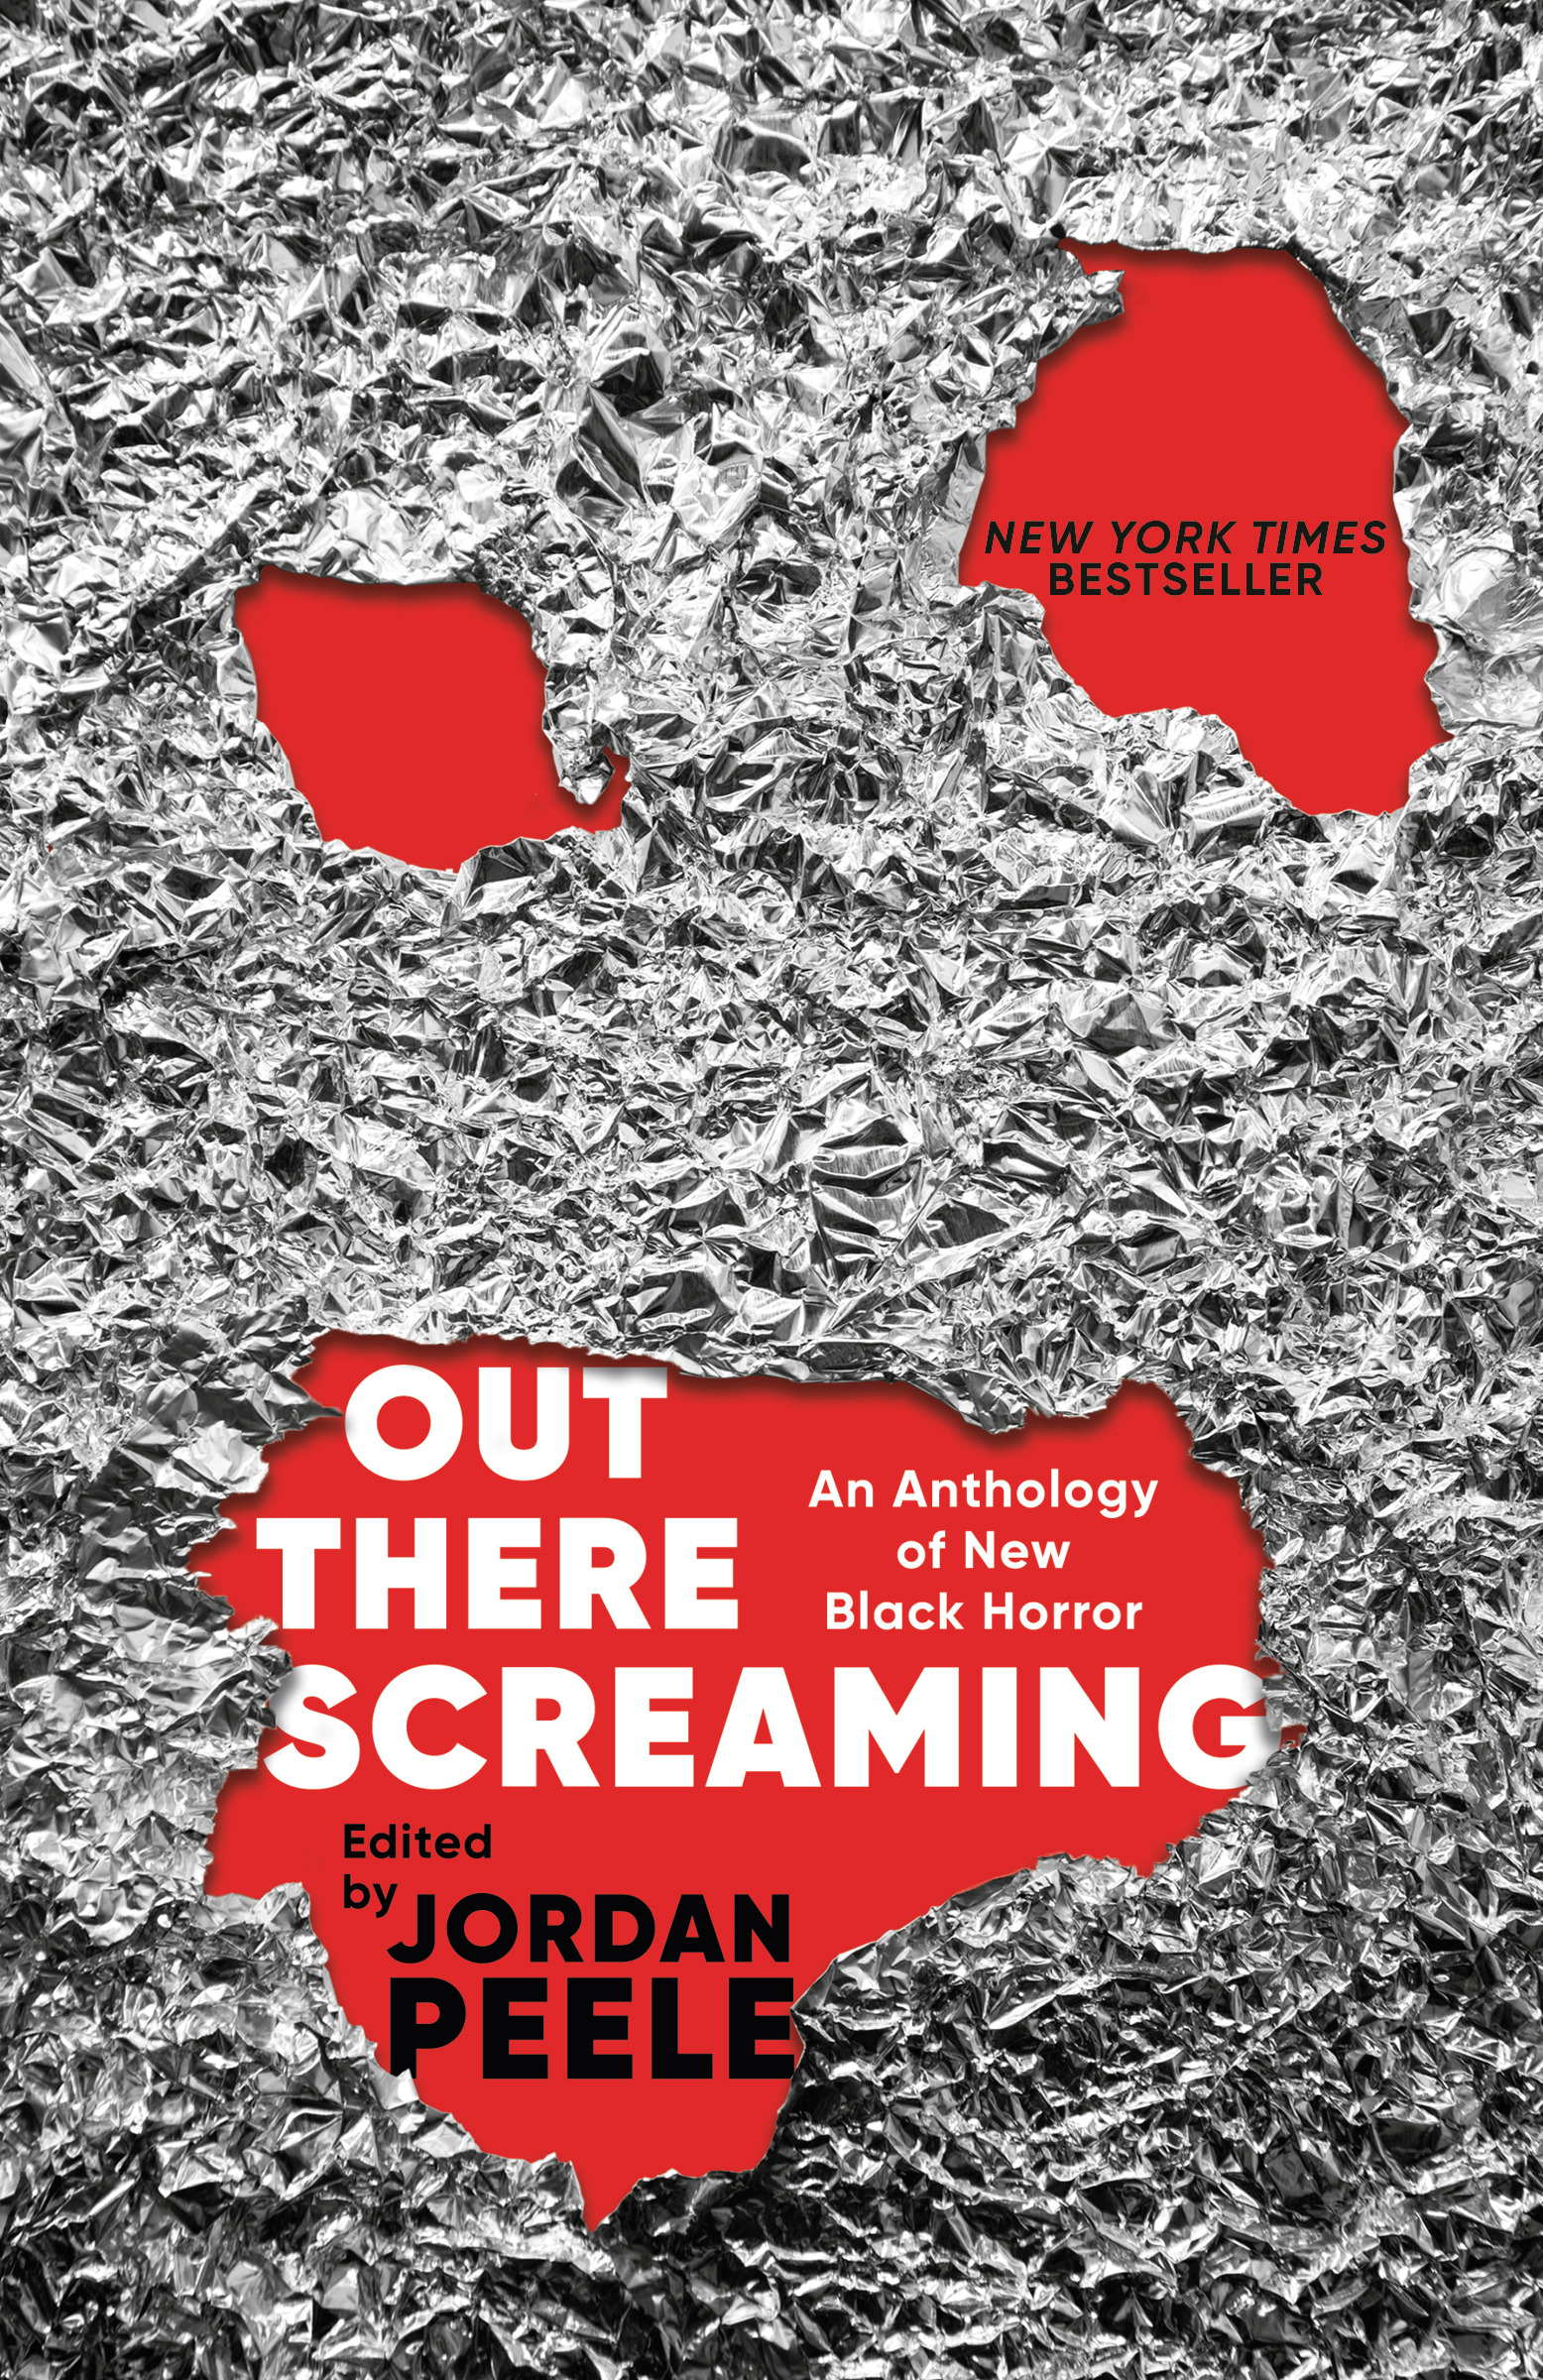 OUT THERE SCREAMING, by PEELE, JORDAN